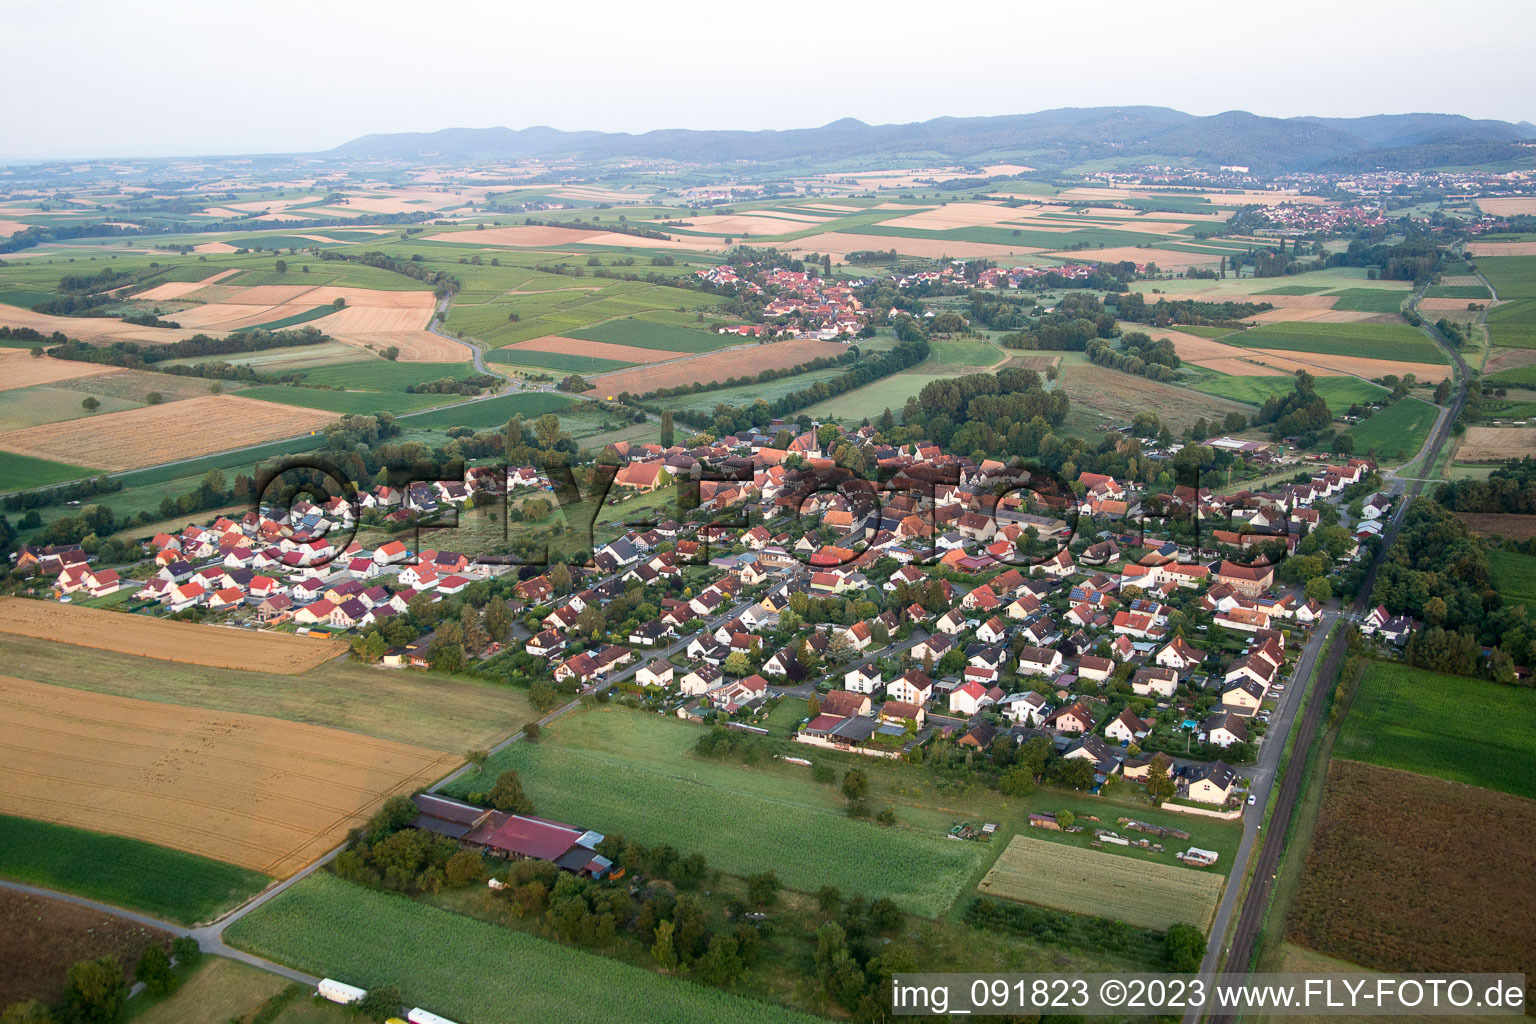 Barbelroth in the state Rhineland-Palatinate, Germany seen from above